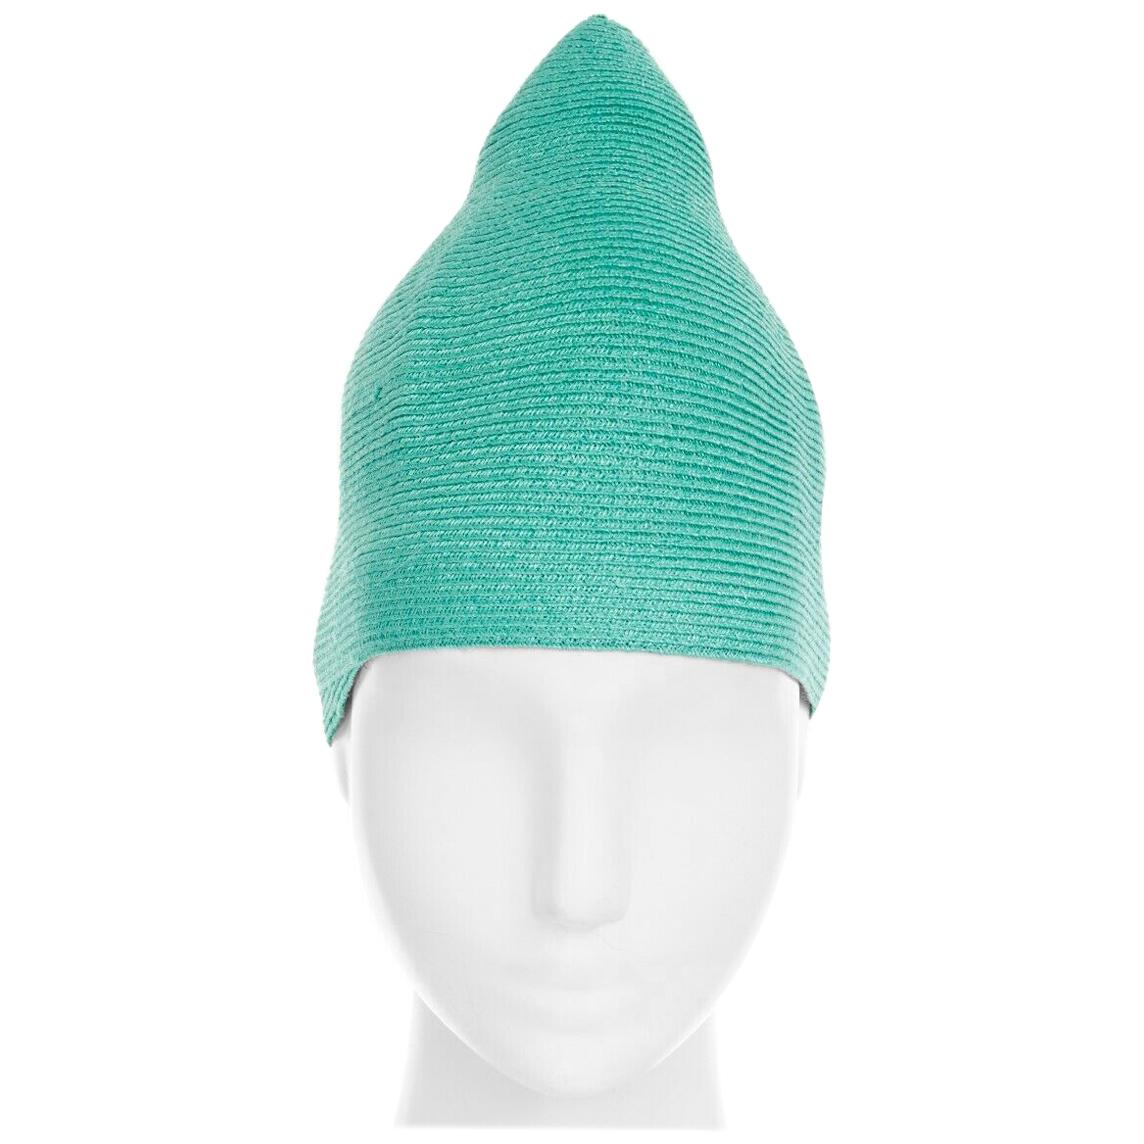 ISSEY MIYAKE PLEATS PLEASE teal green raffia straw woven pointed moroccan hat